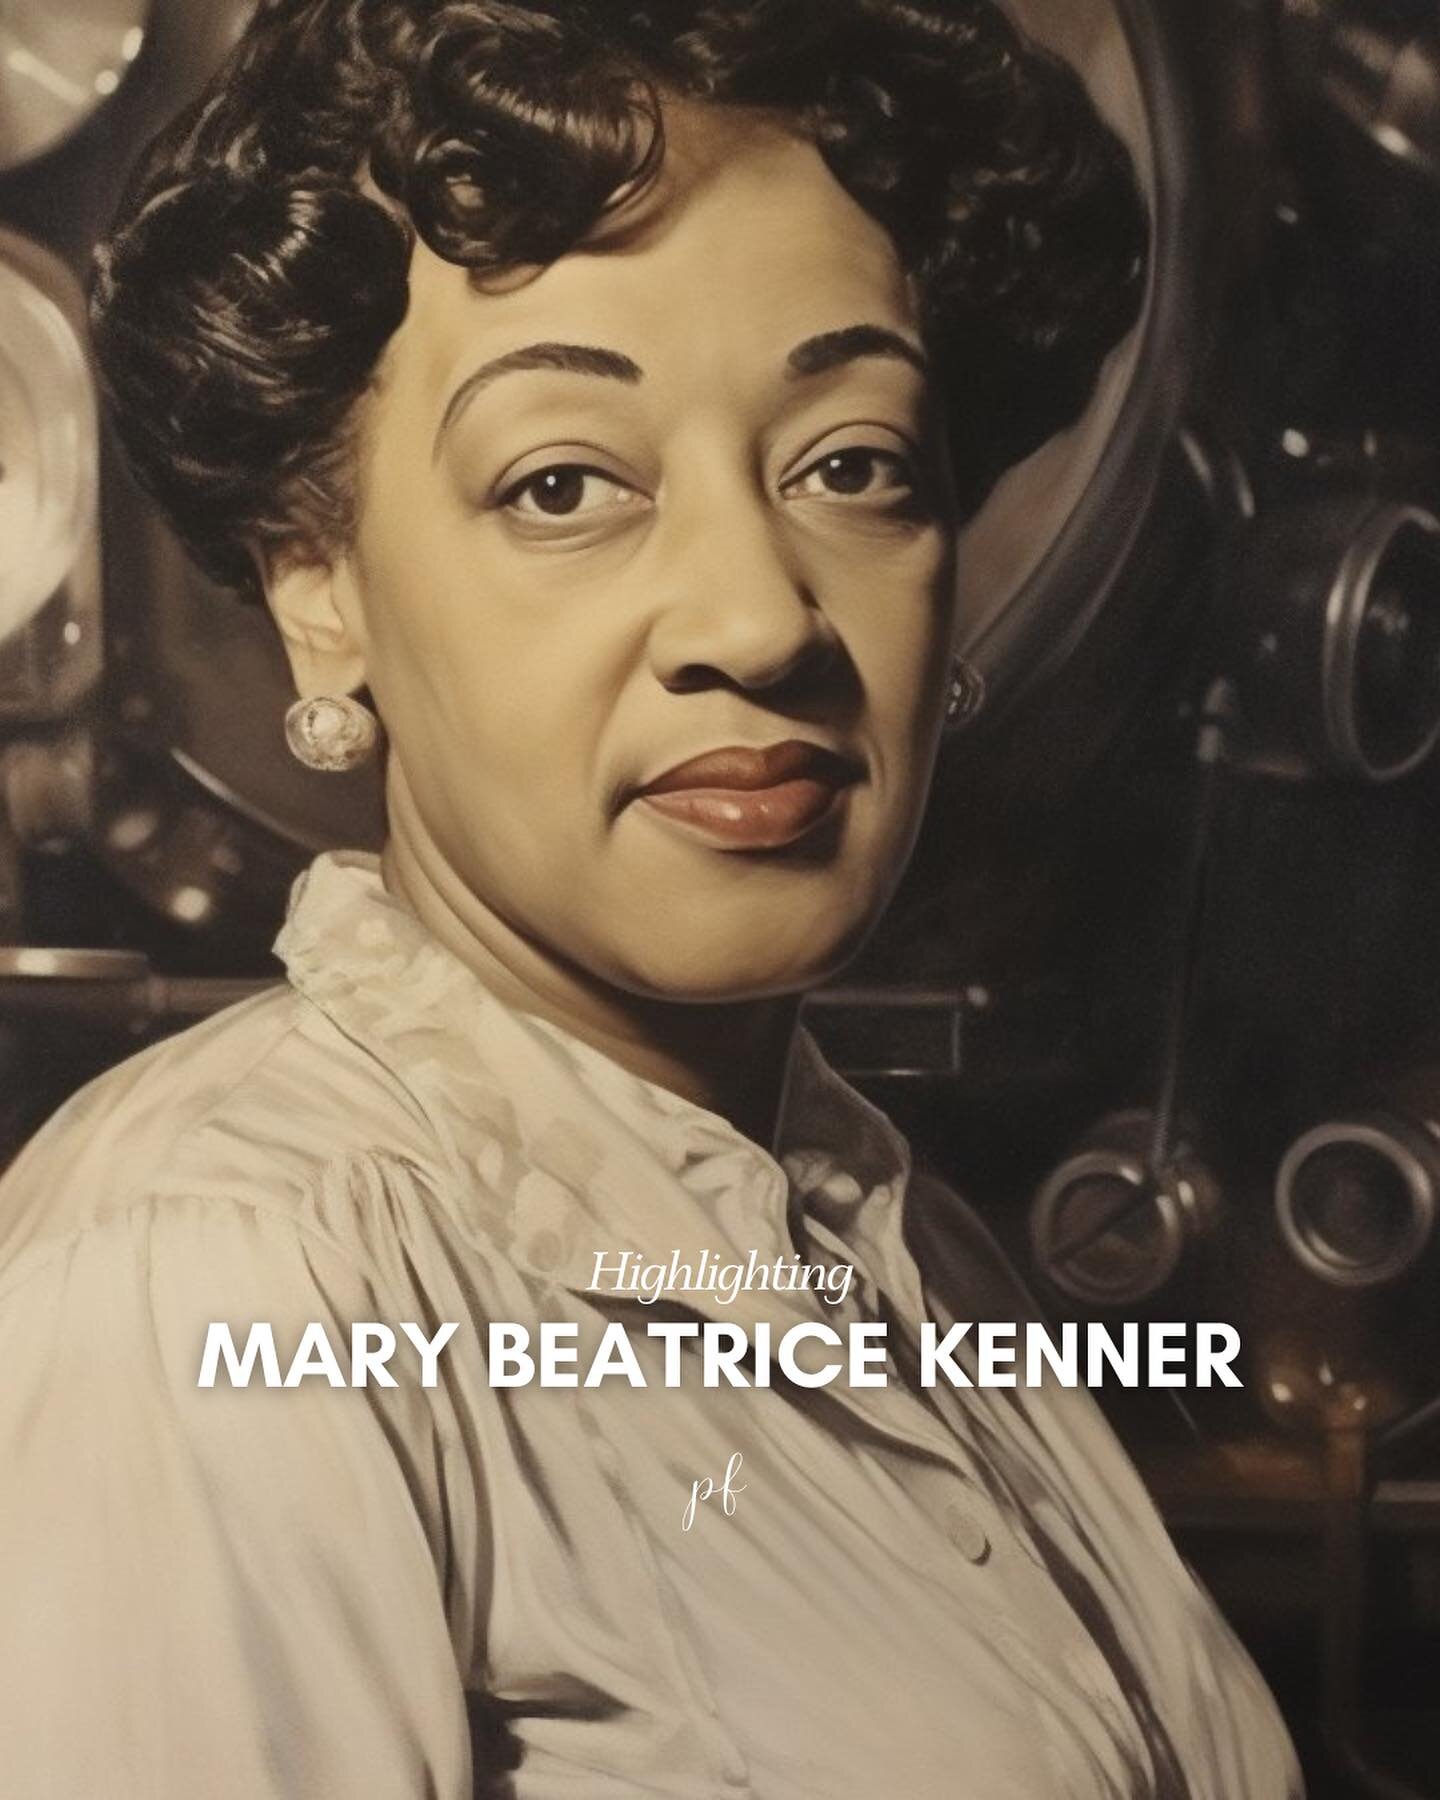 During this Black History Month, we want to celebrate the incredible contributions of trailblazers like Mary Beatrice Kenner! Her development of the adjustable sanitary belt was a pioneering invention that paved the way for modern menstrual care. Let